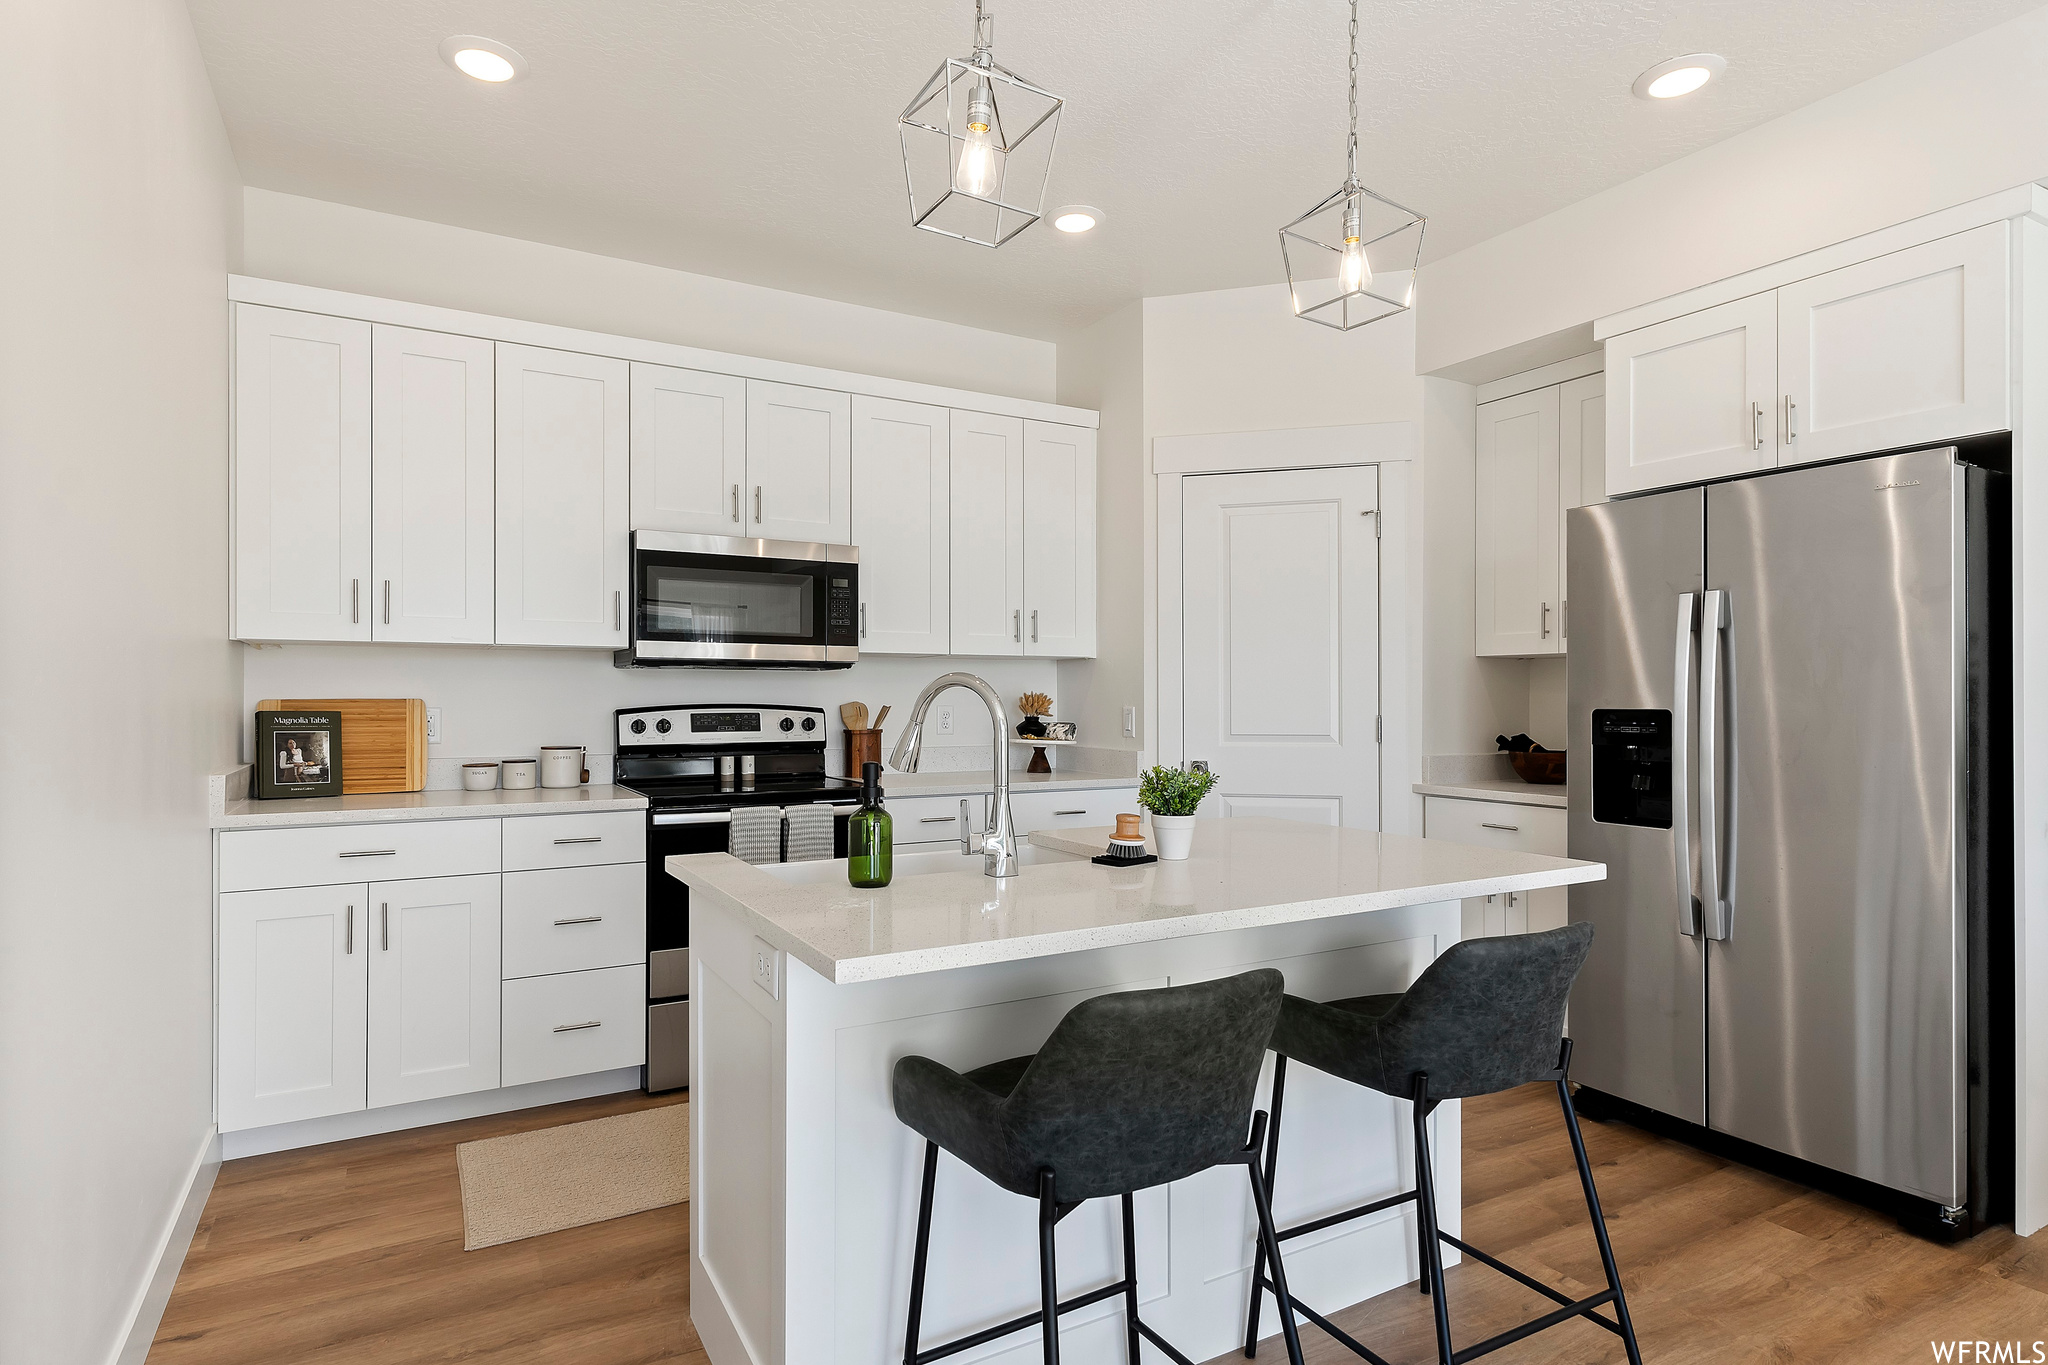 Kitchen with pendant lighting, light wood-type flooring, white cabinets, and stainless steel appliances